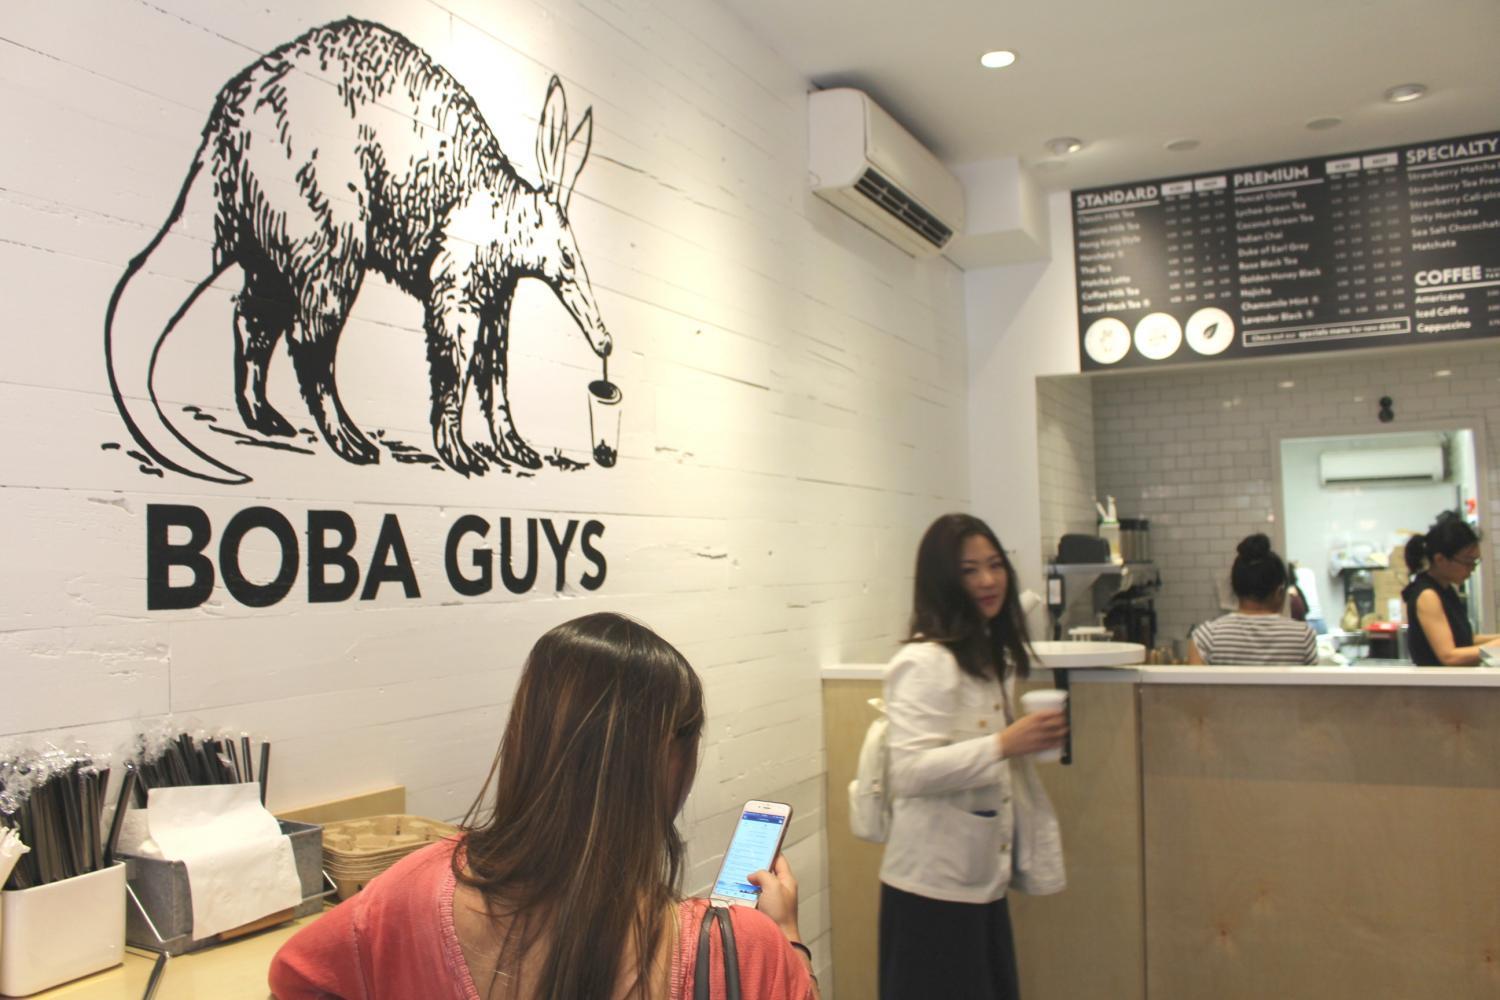 Boba+Guys+is+a+favorite+among+students+to+get+bubble+tea+near+campus%2C+stocked+with+classics+as+well+as+adventurous+flavors.